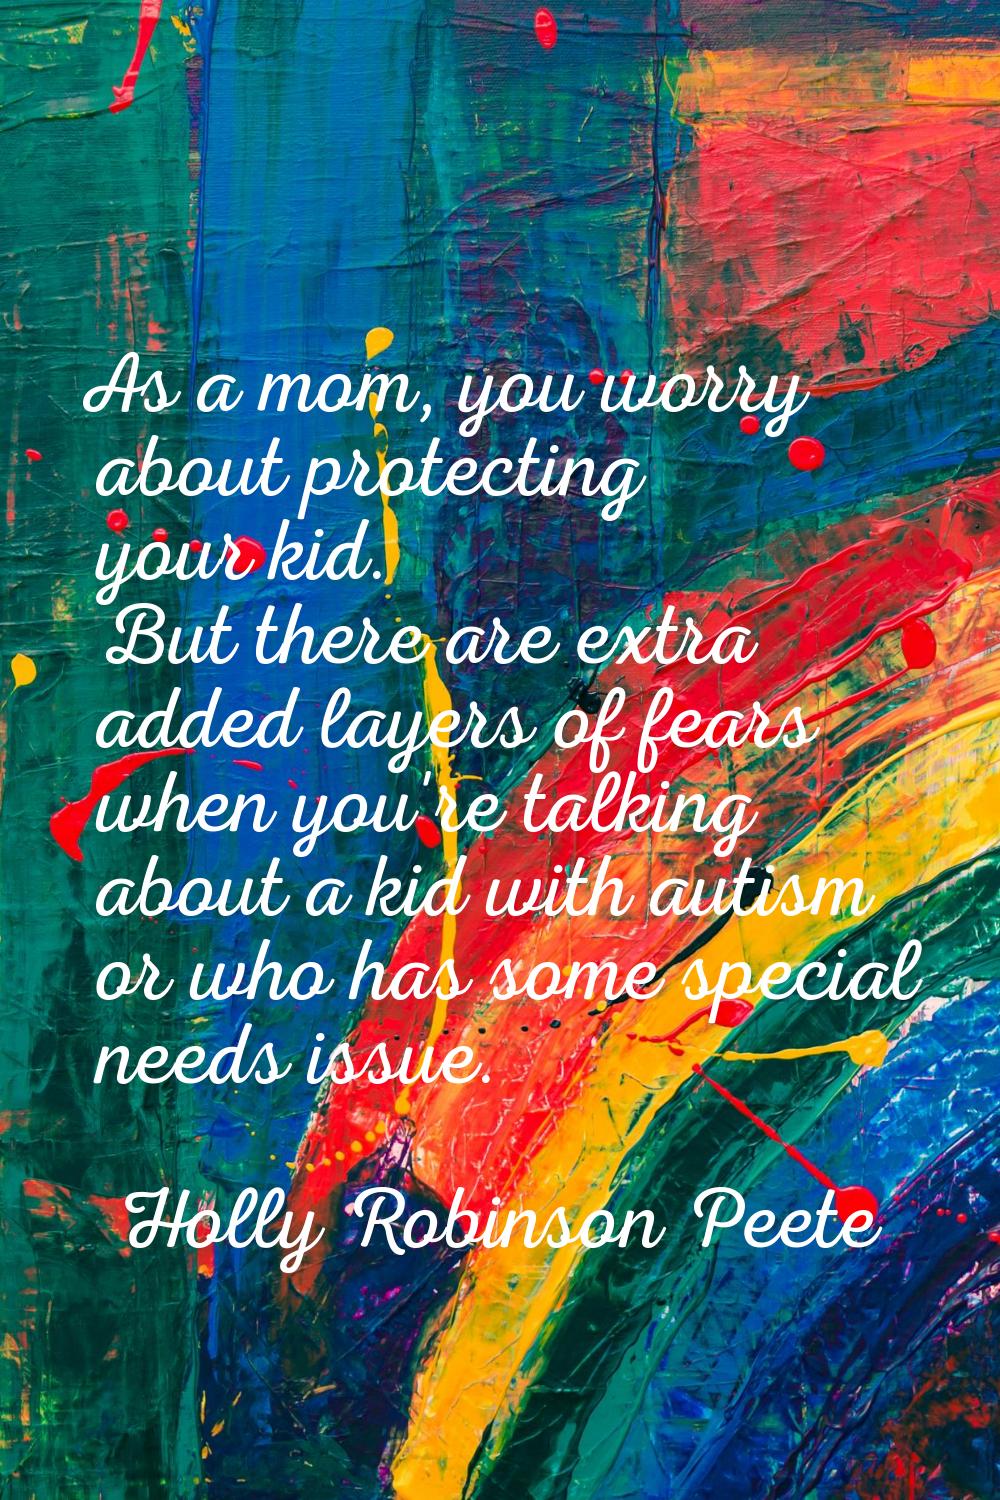 As a mom, you worry about protecting your kid. But there are extra added layers of fears when you'r